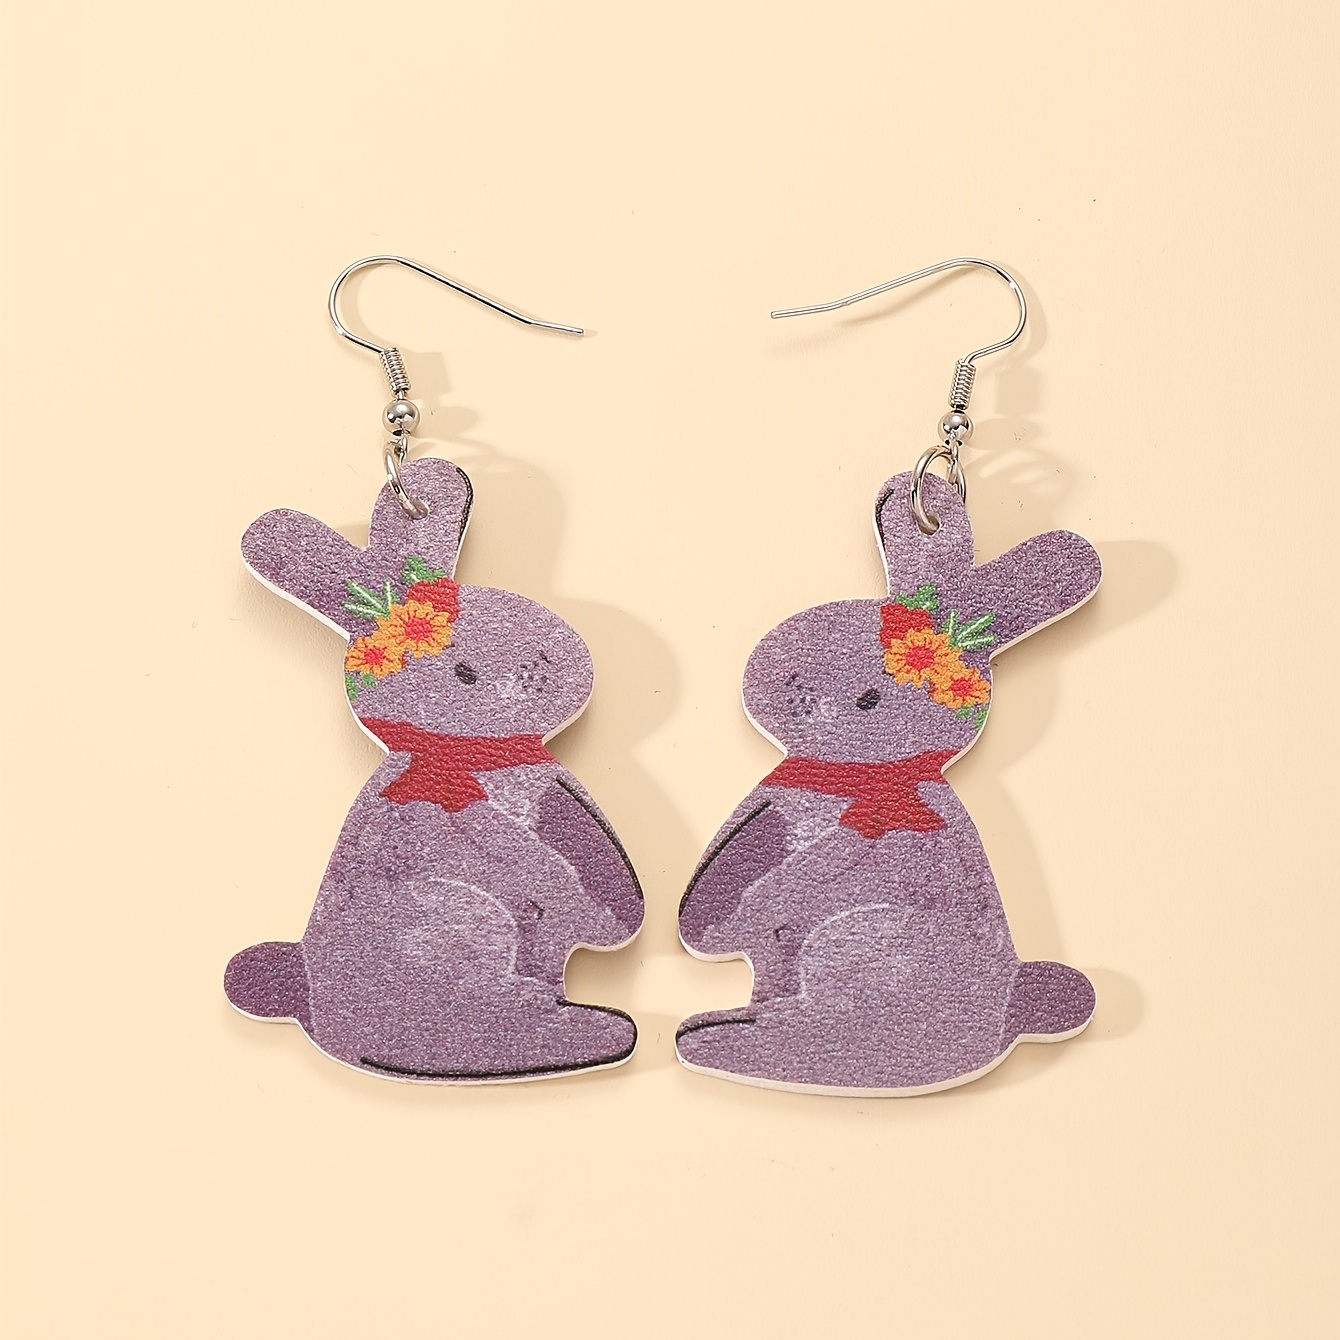 1pair Girls Casual Cute Cartoon Easter Rabbit Earrings Decorative Accessories For Party Gift